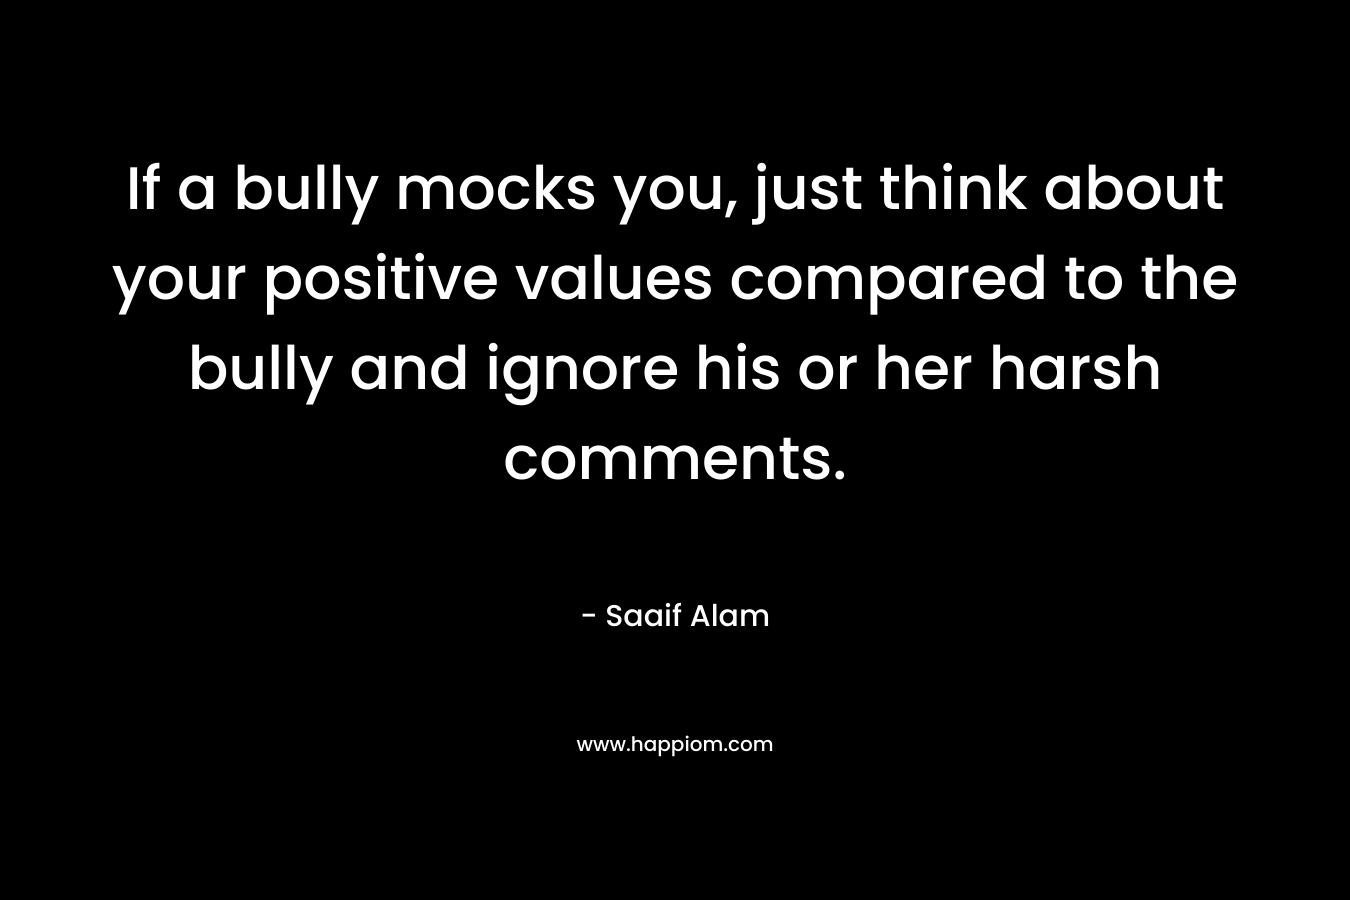 If a bully mocks you, just think about your positive values compared to the bully and ignore his or her harsh comments.